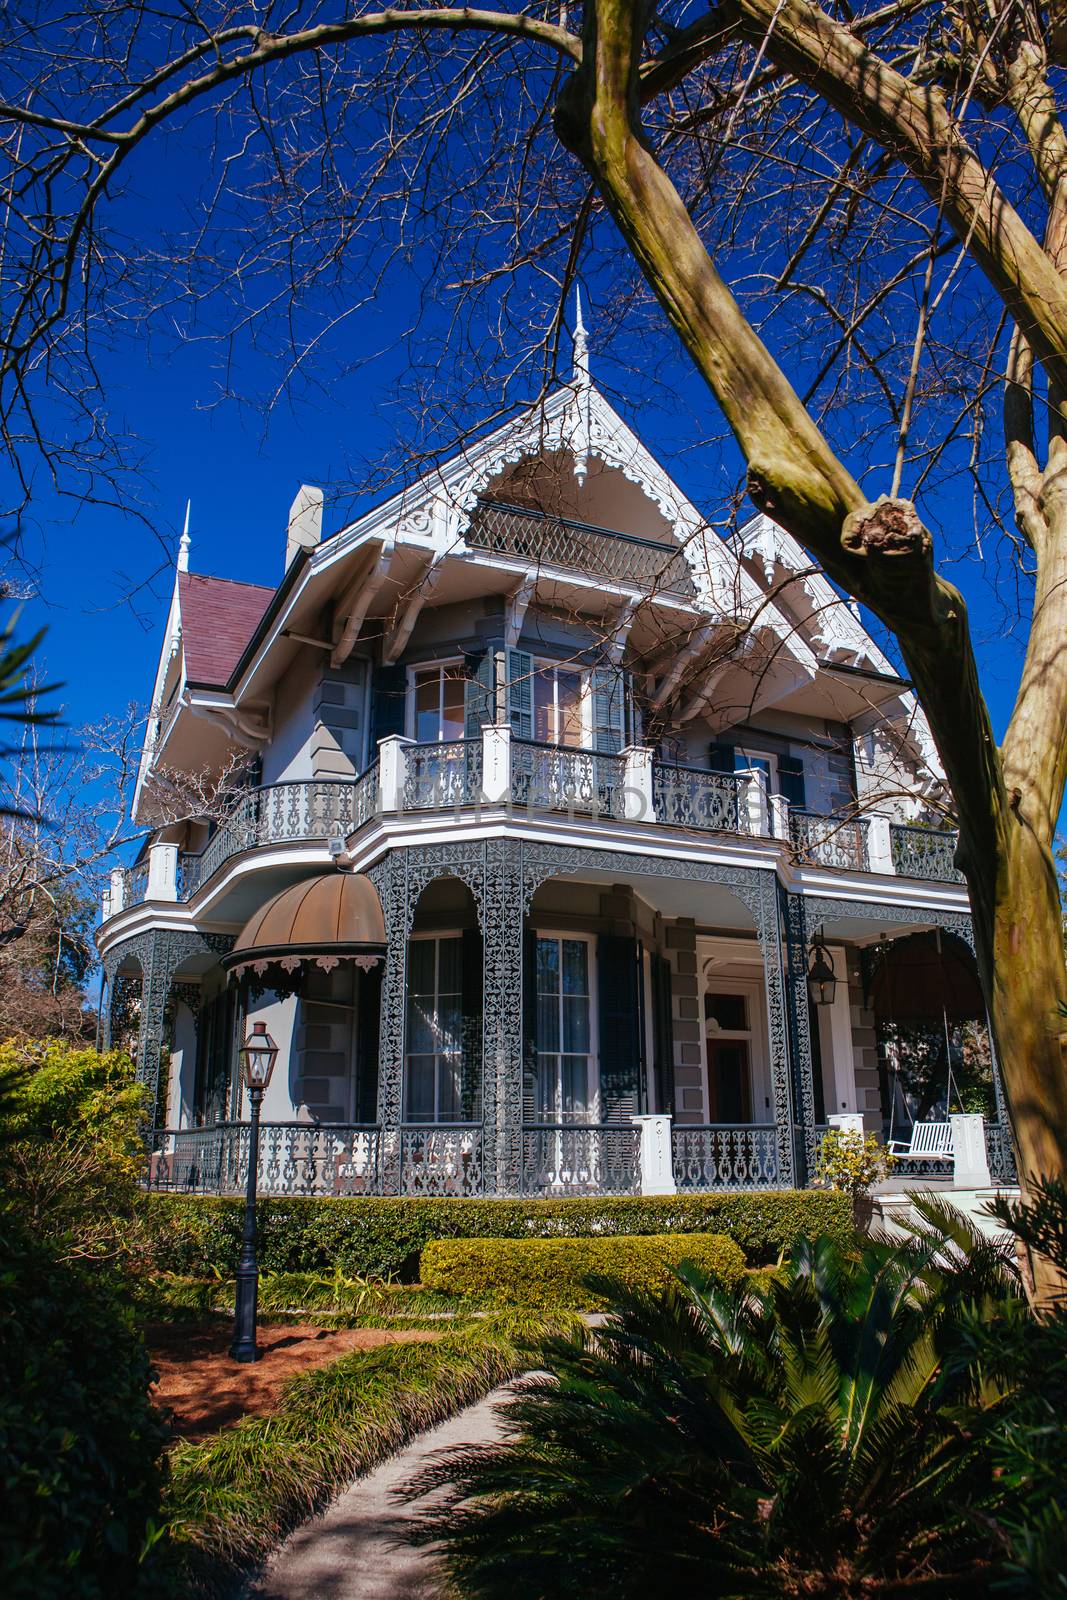 New Orleans, USA - January 21 2013: Stunning architecture in the Garden District in New Orleans, Louisiana, USA